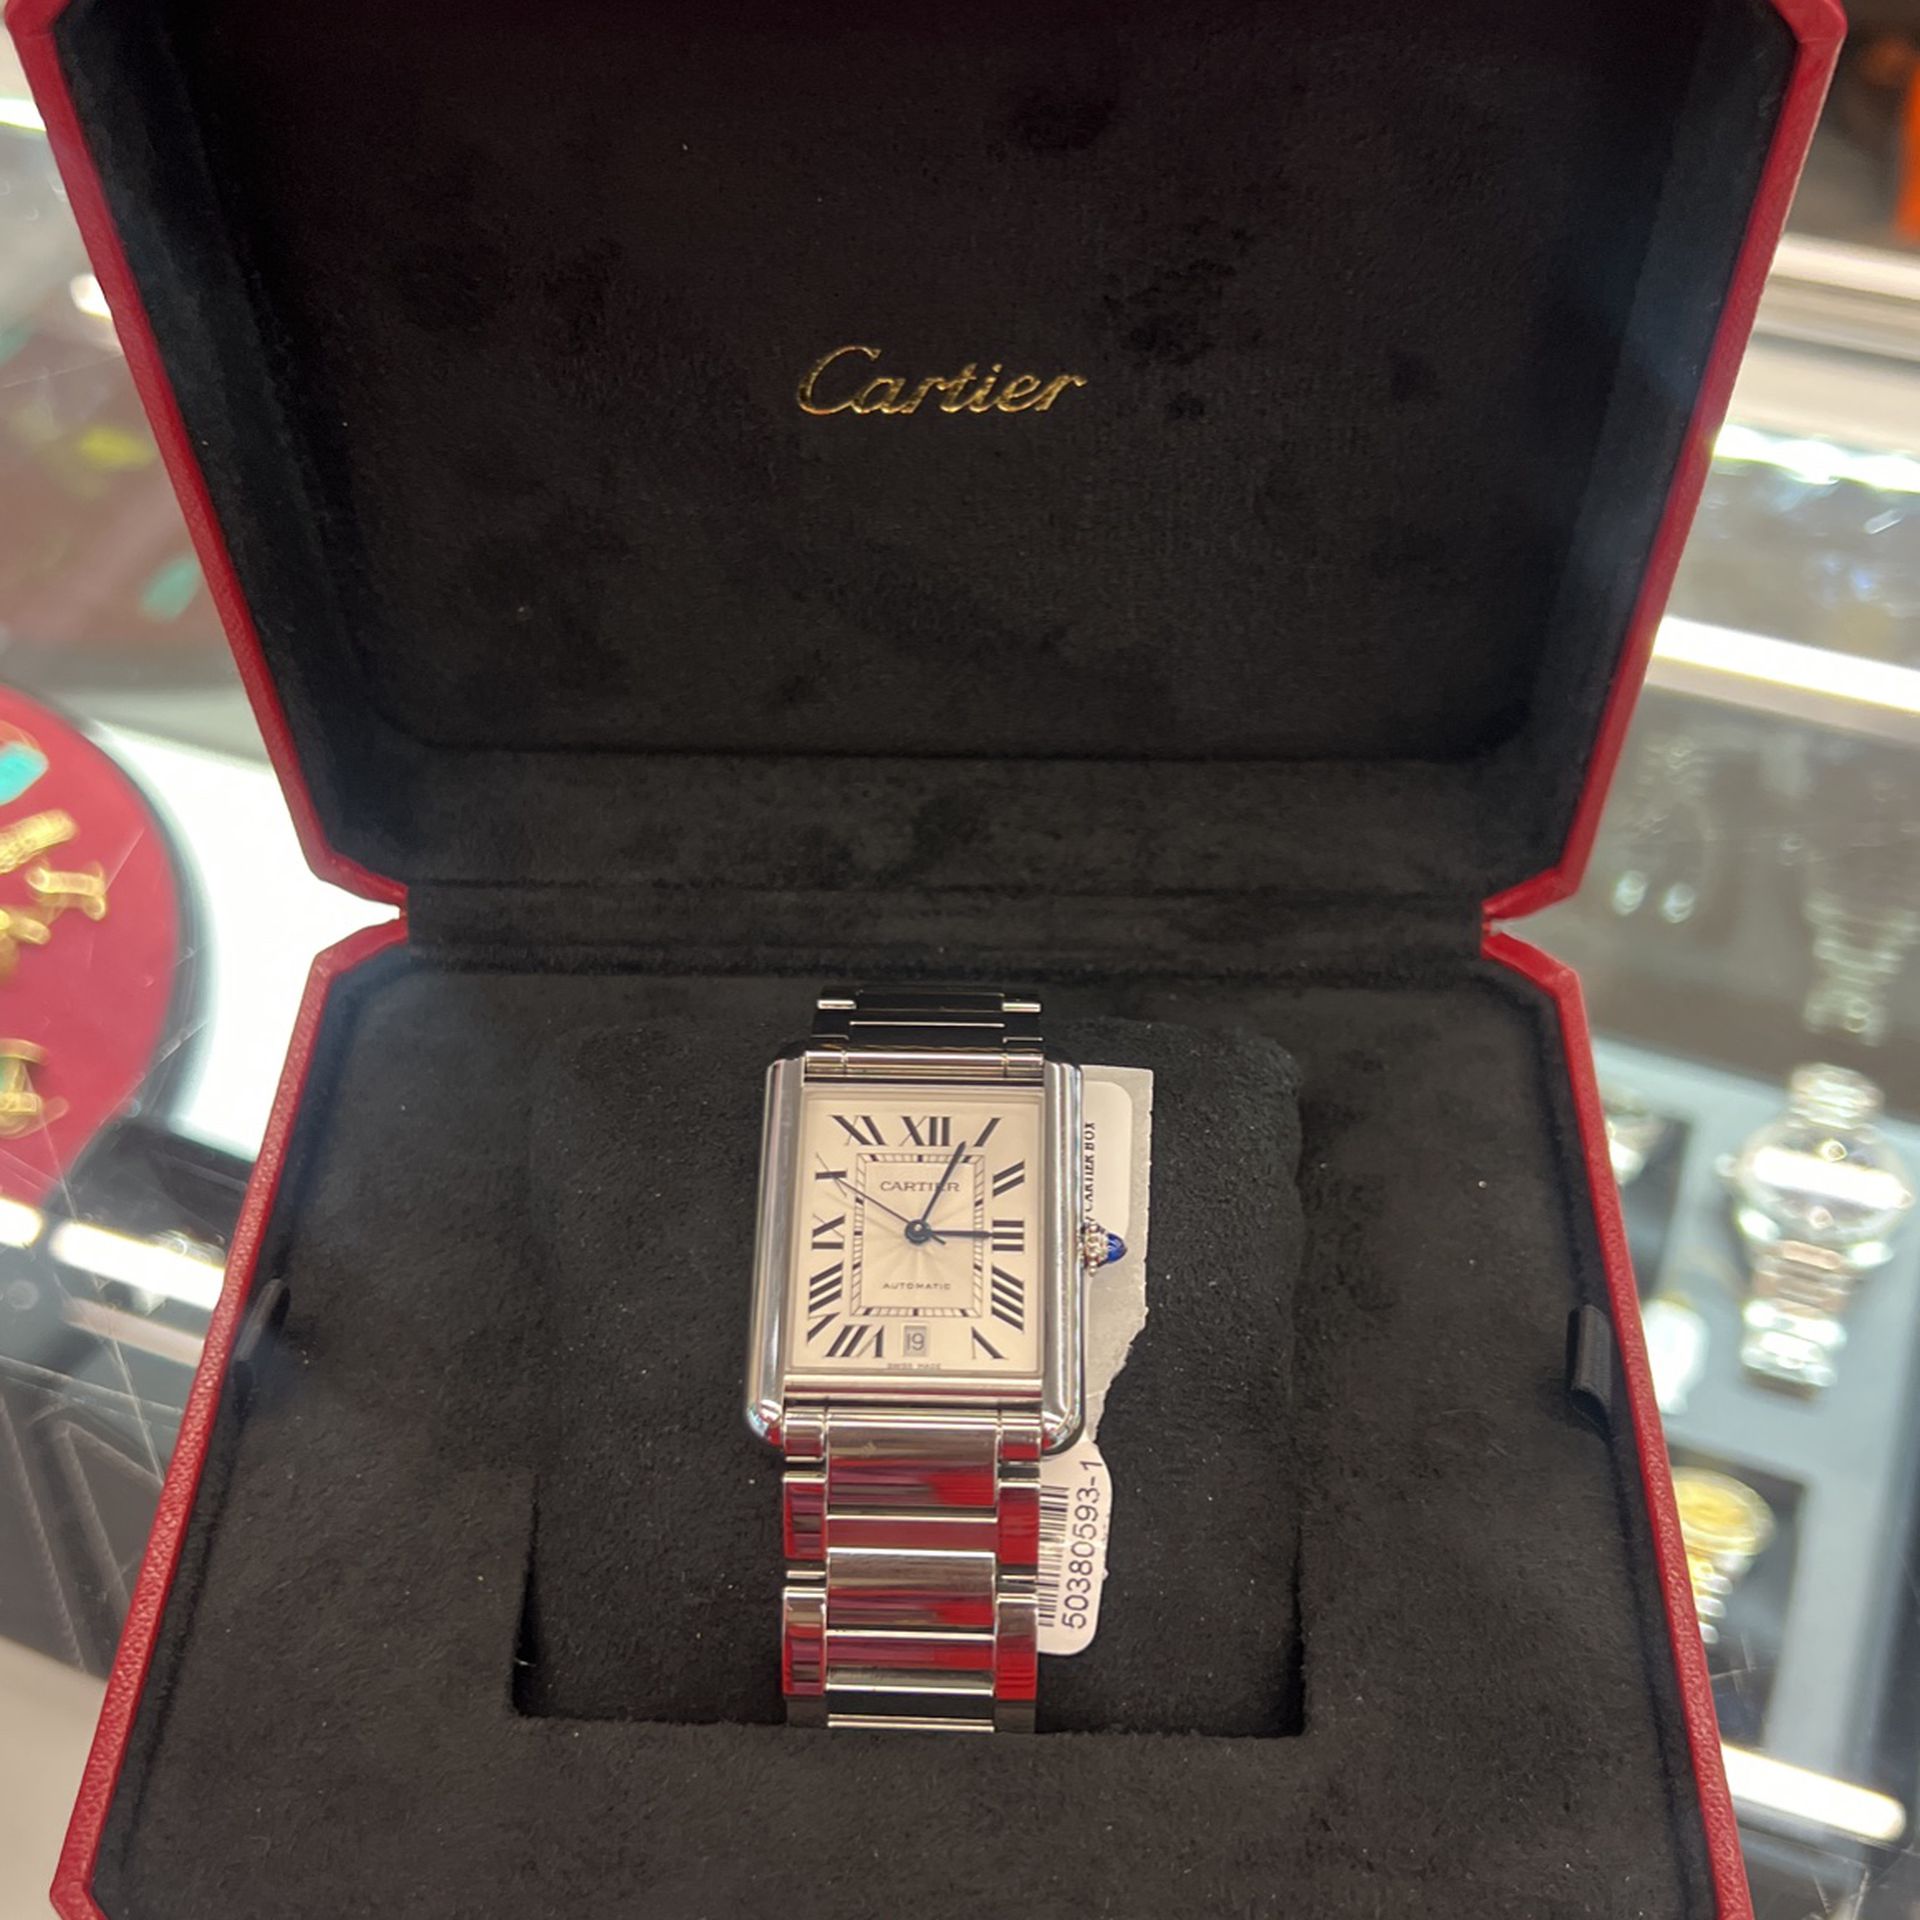 Solo Automatic Cartier Watch